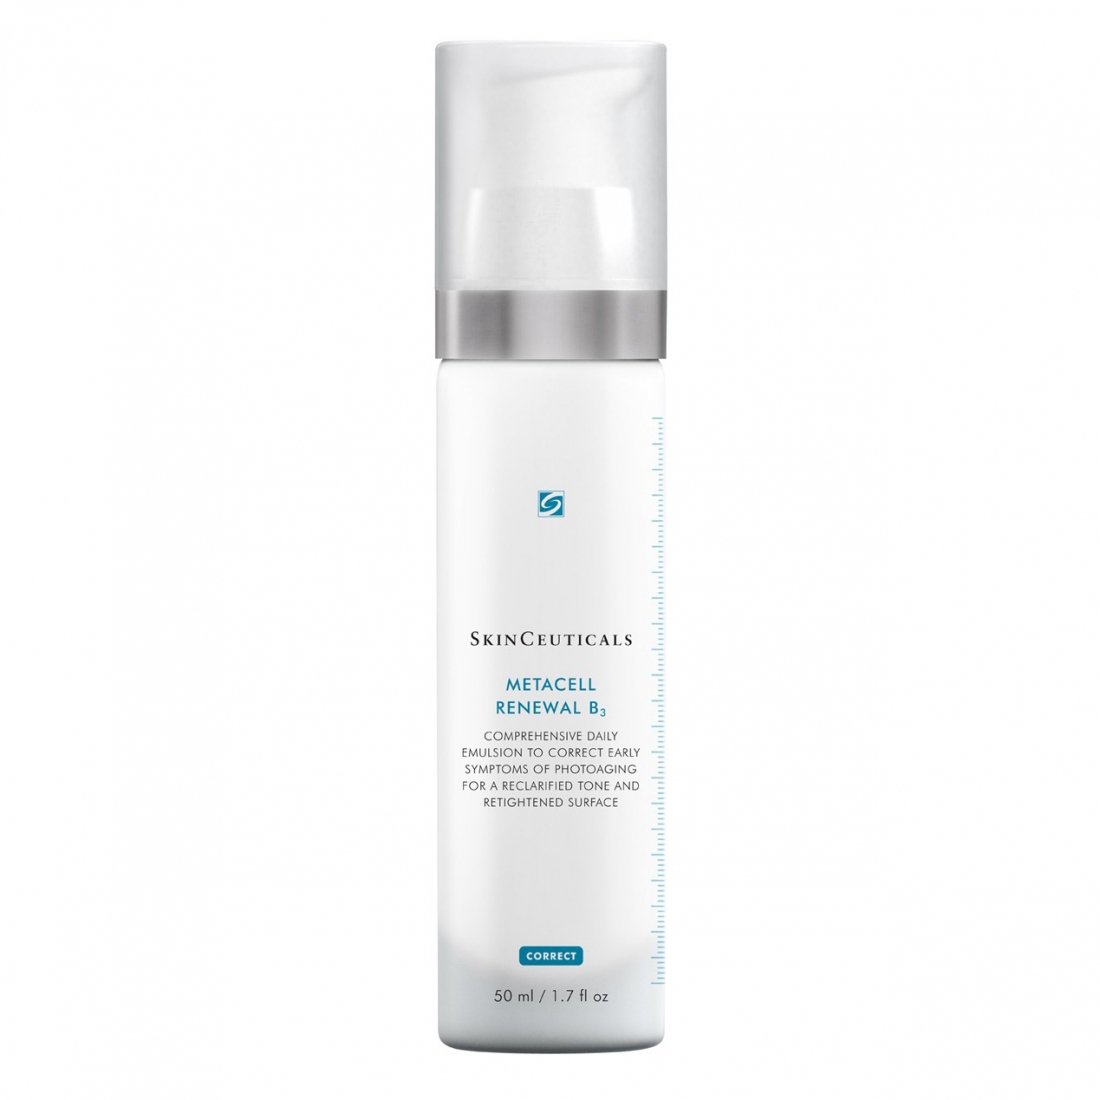 'Metacell Renewal B3' Day Emulsion - 50 ml